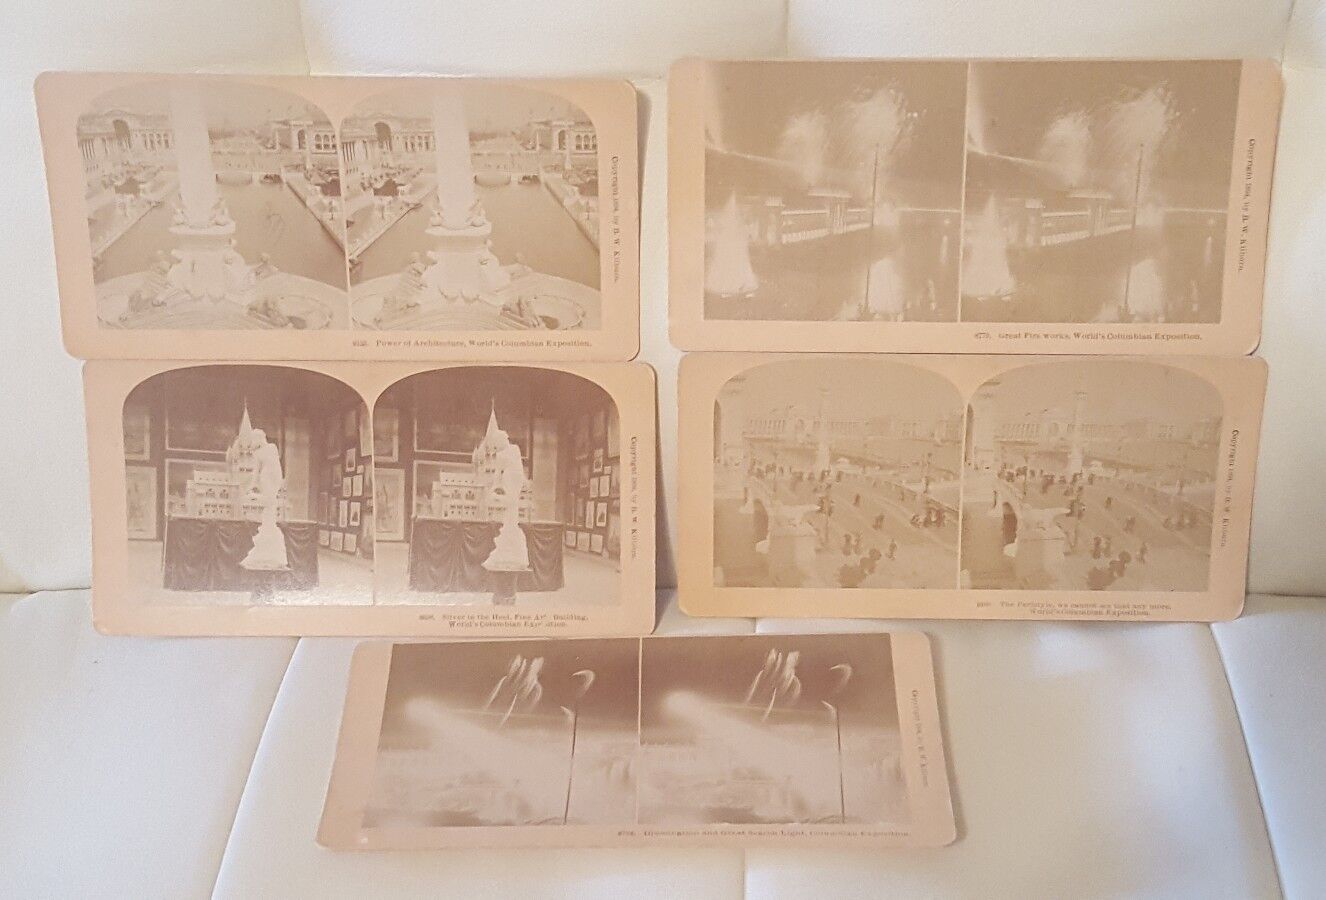 Lot of 5 Antique B.W. Kilburn Stereoview Cards 1893 Worlds Columbian Exposition